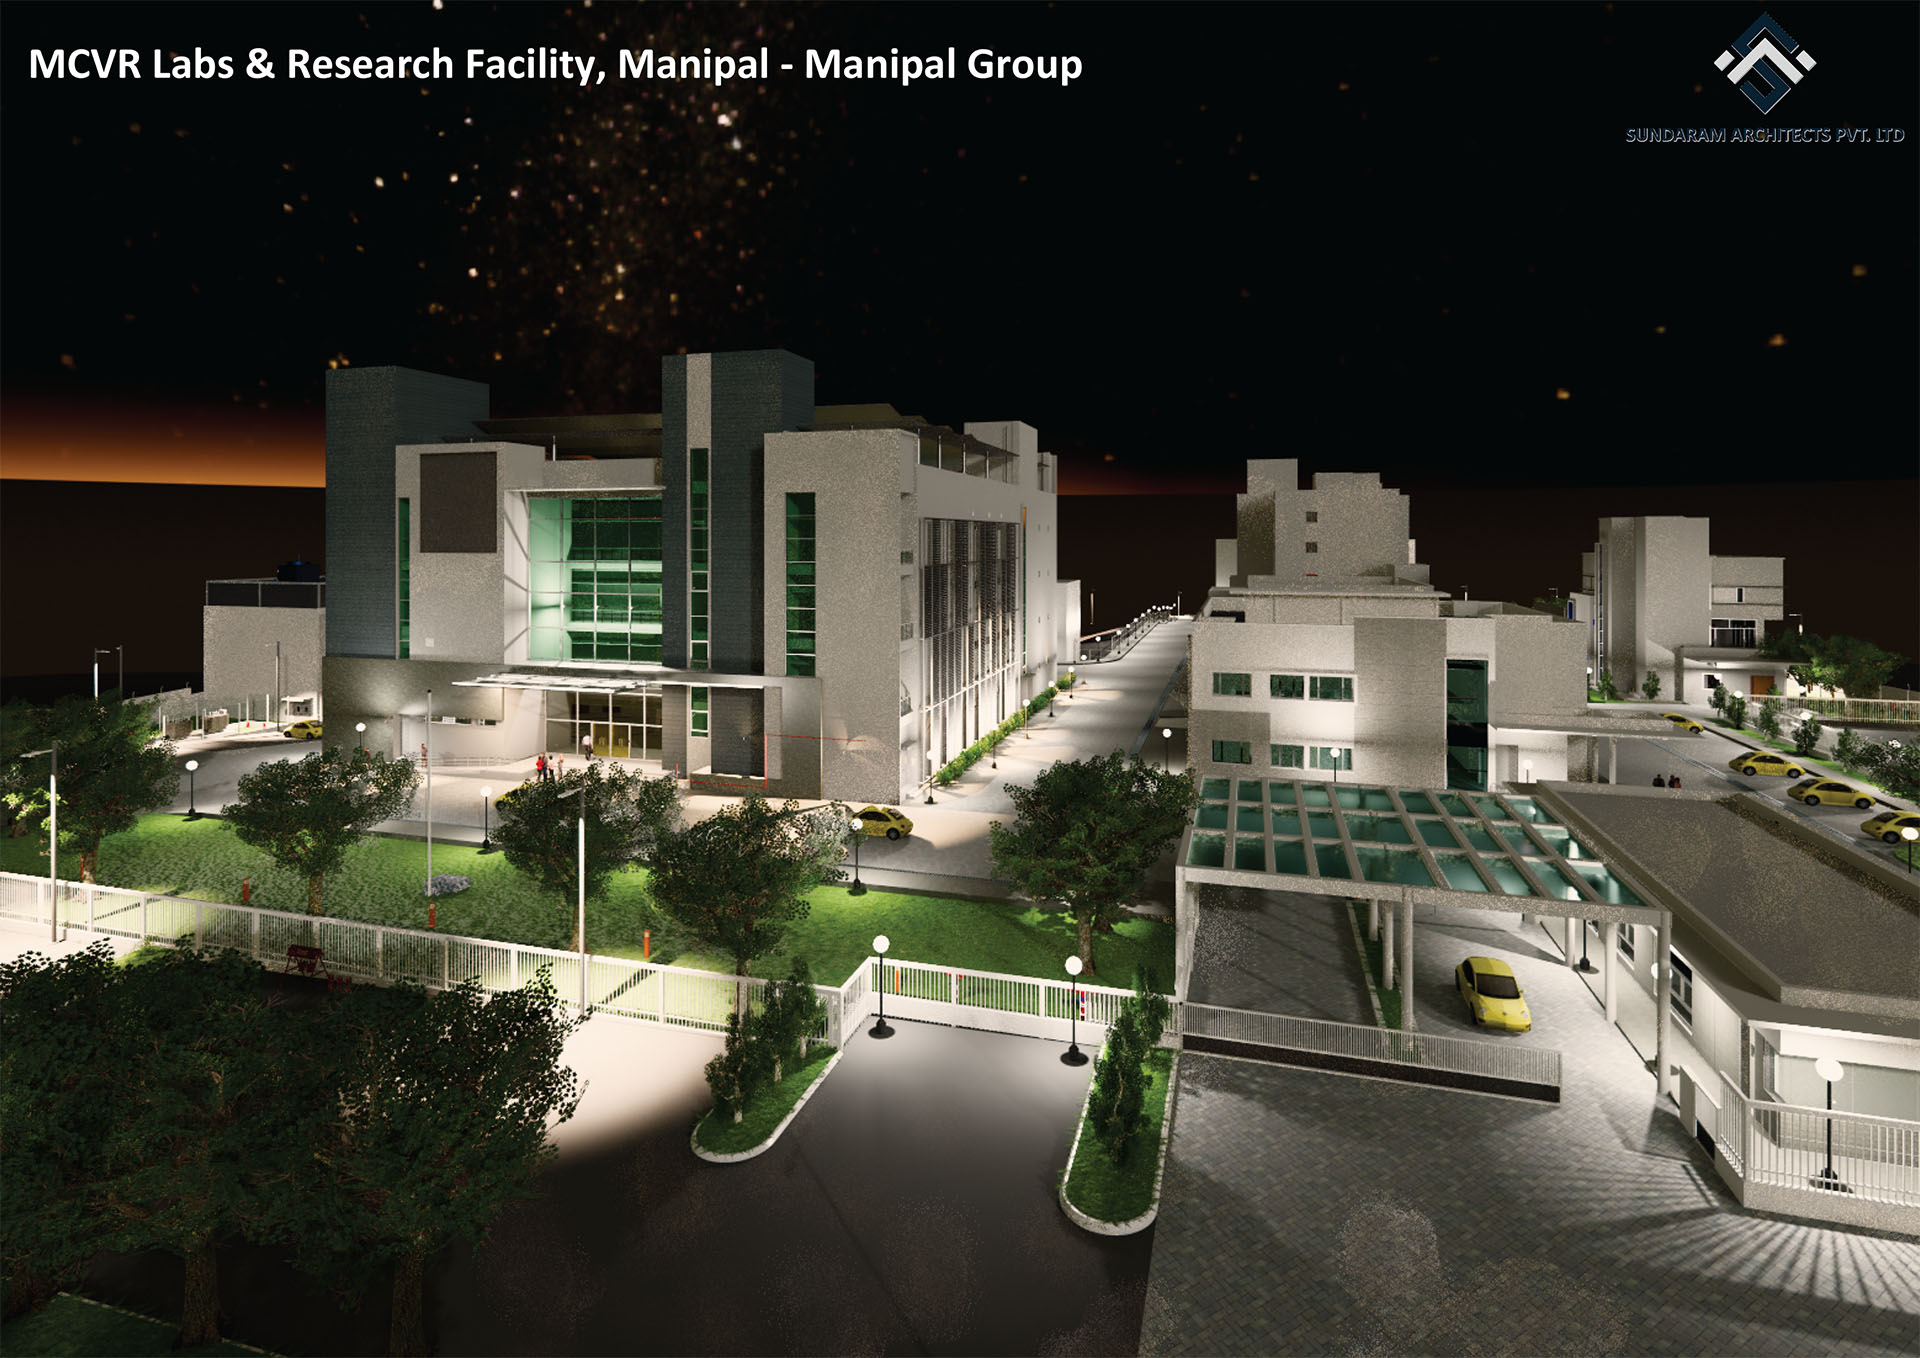 Sundaram Architects designed MCVR Labs & Research Facility, Manipal - Manipal Group